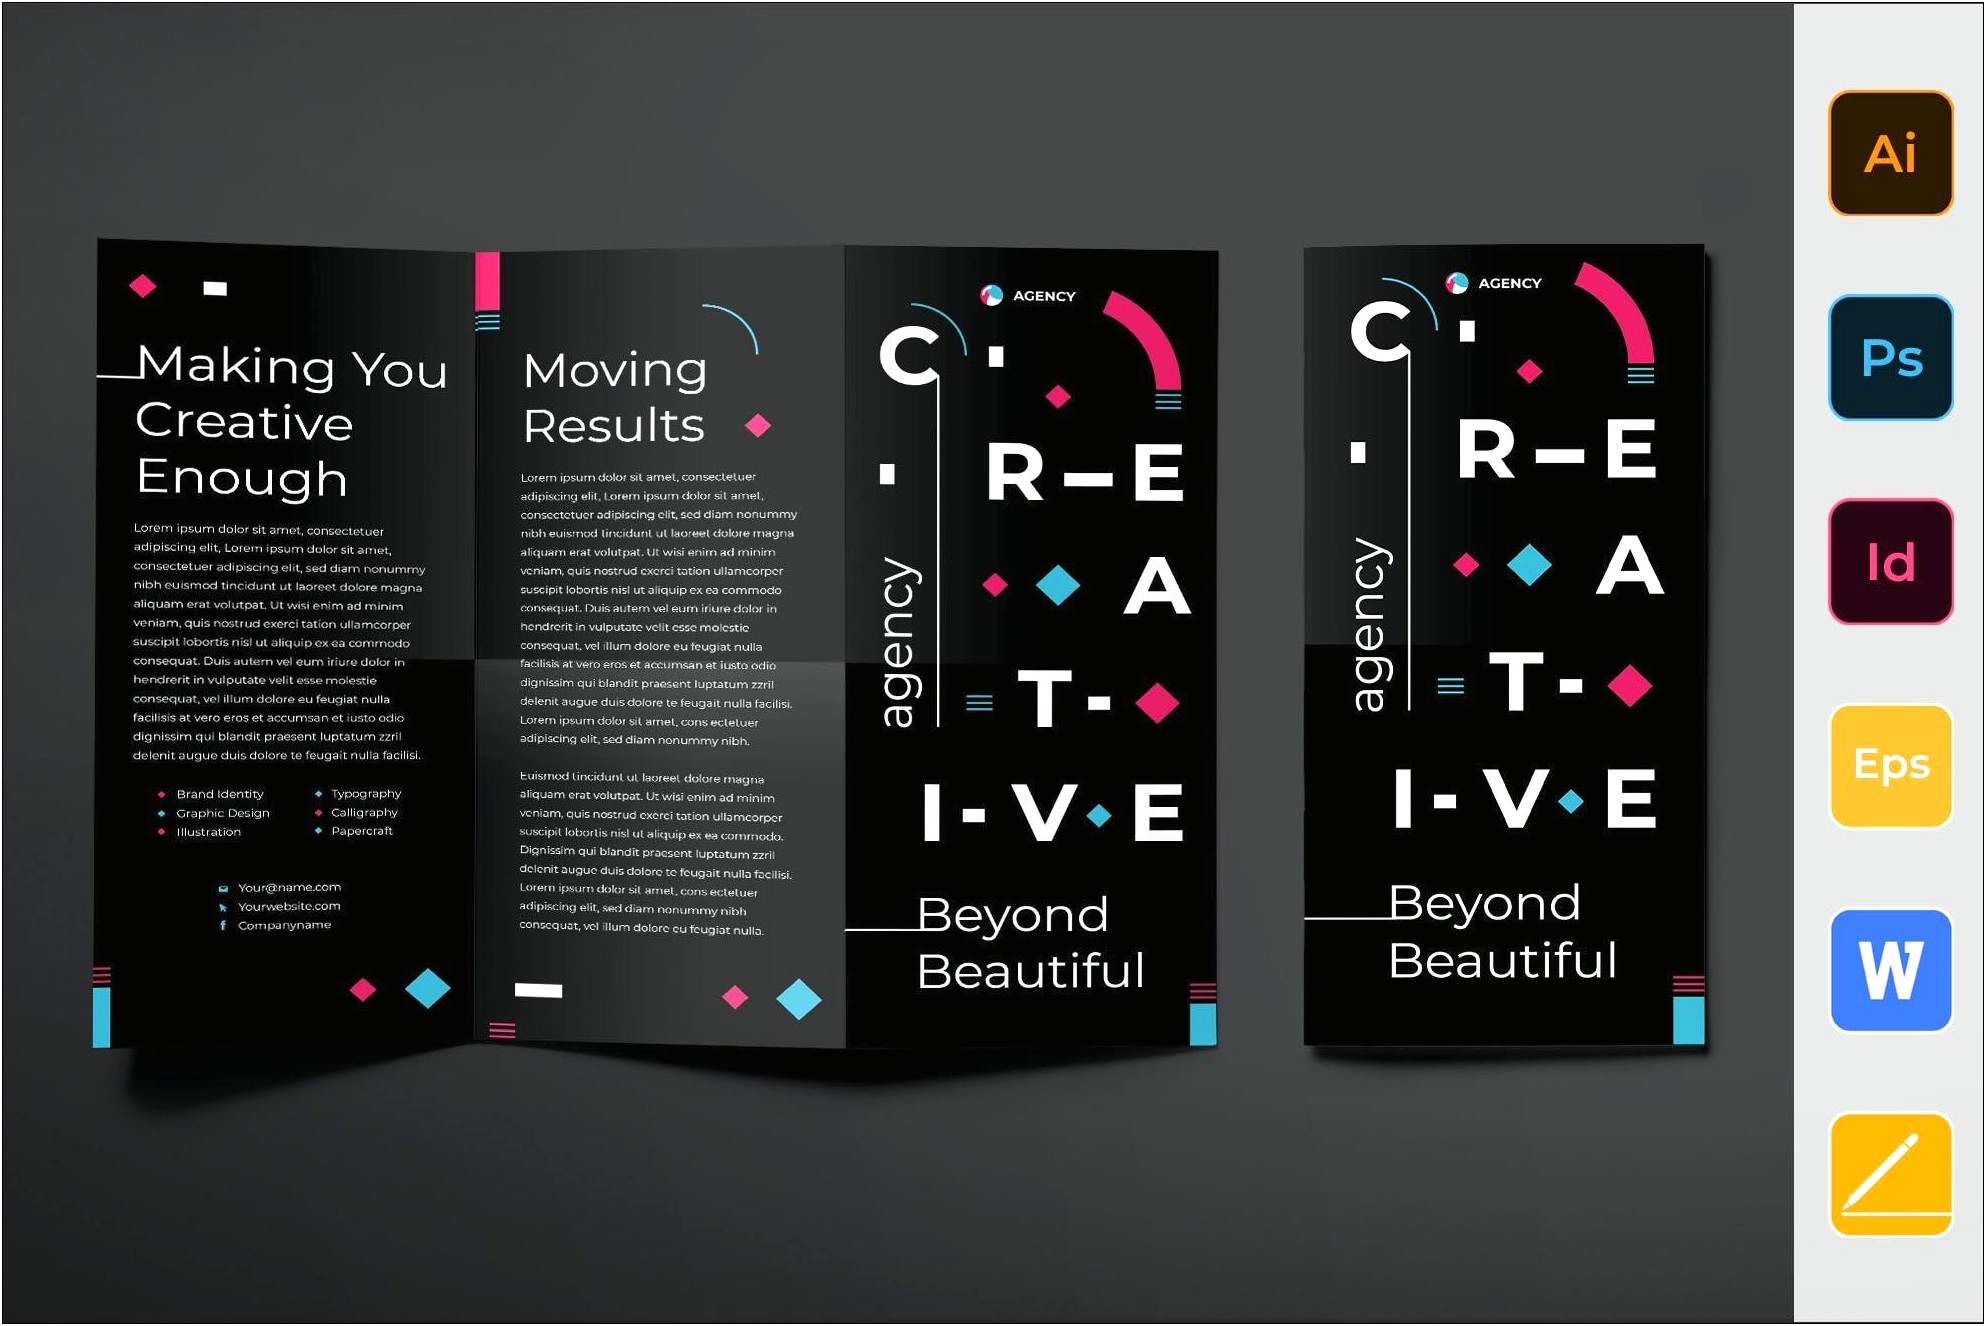 3 Fold Brochure Indesign Template Free